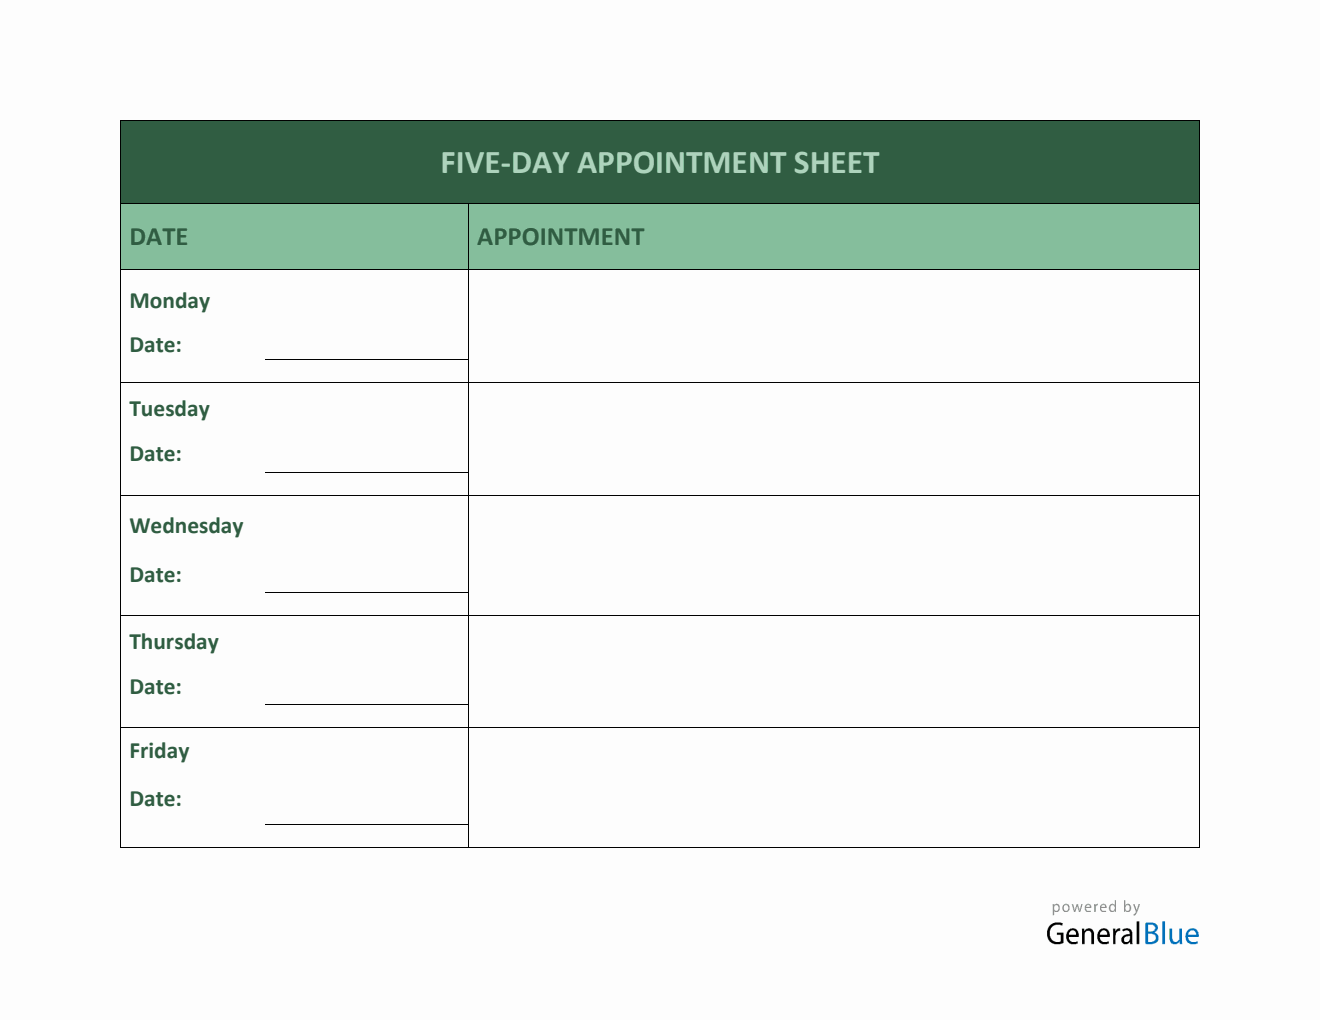 Five-Day Appointment Sheet Template in Word (Printable)